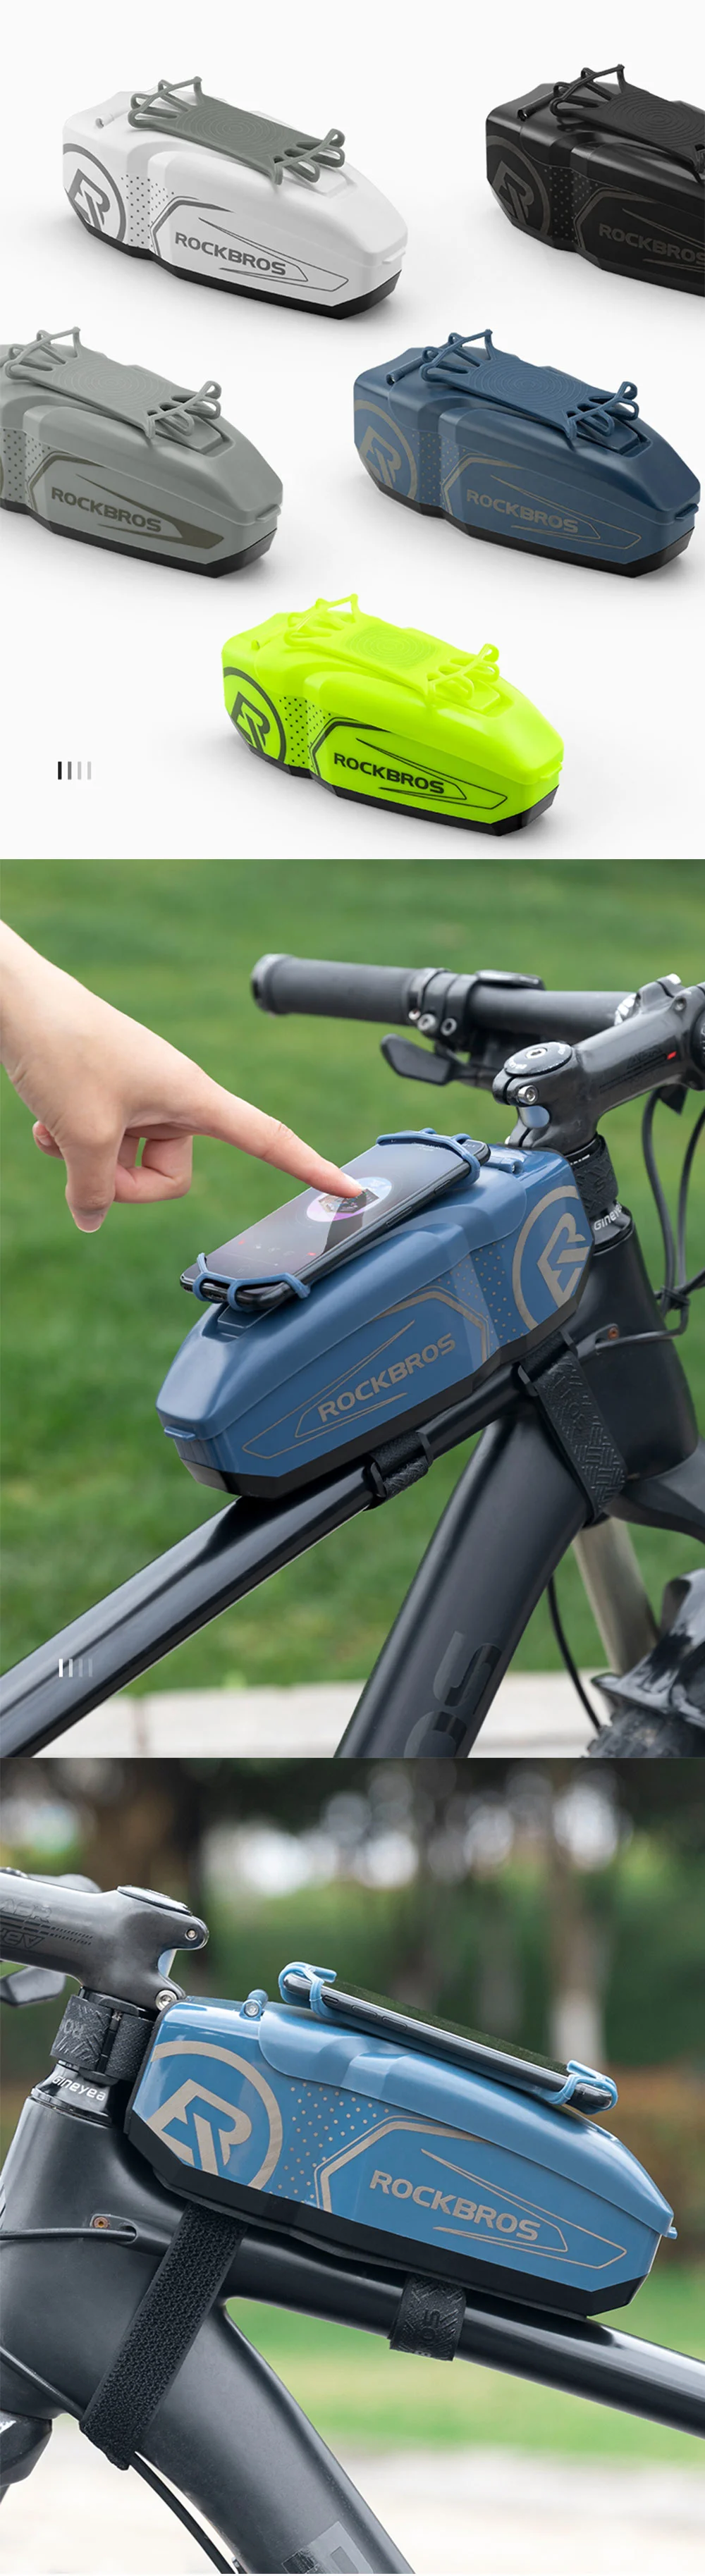 Hot Sellingtouch Screen Bike Bicycle Phone Mount Bags Waterproof Smartphone Bag Bicycle Frame Bag New for Sale